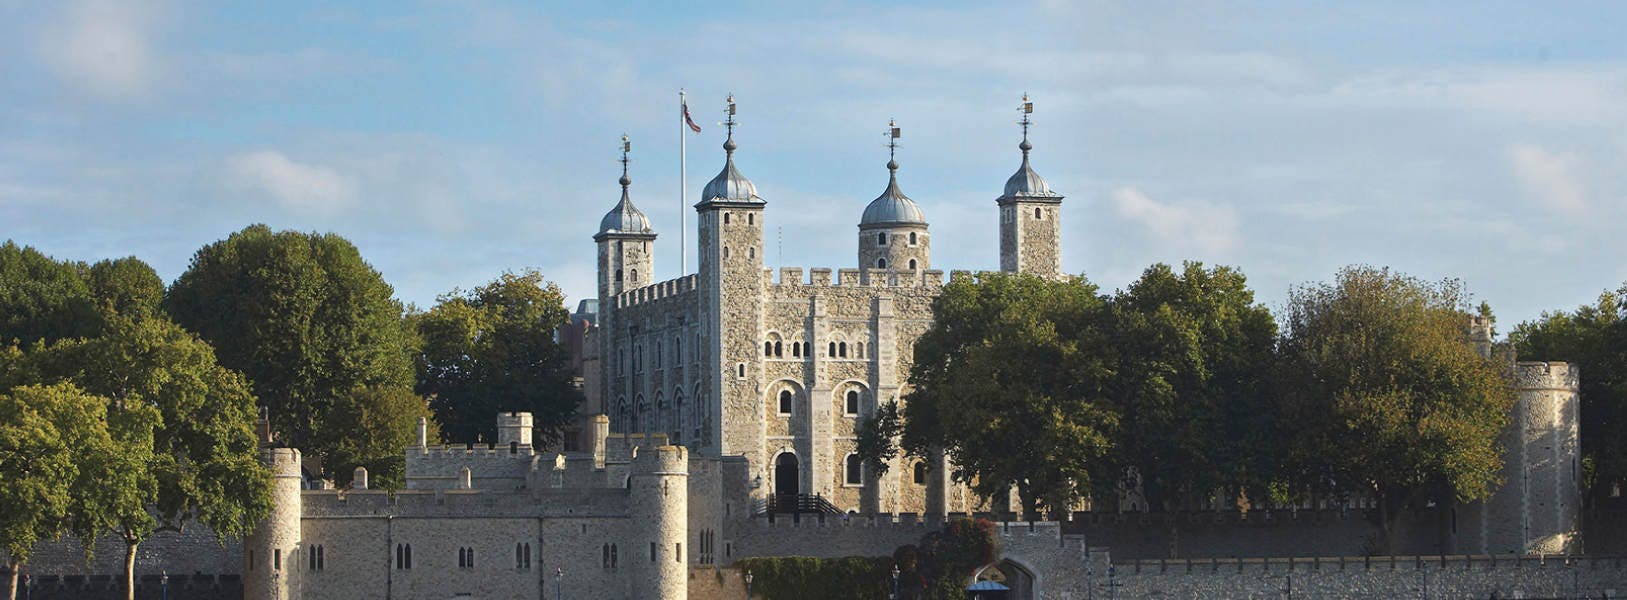 Tower of London — Museum Review